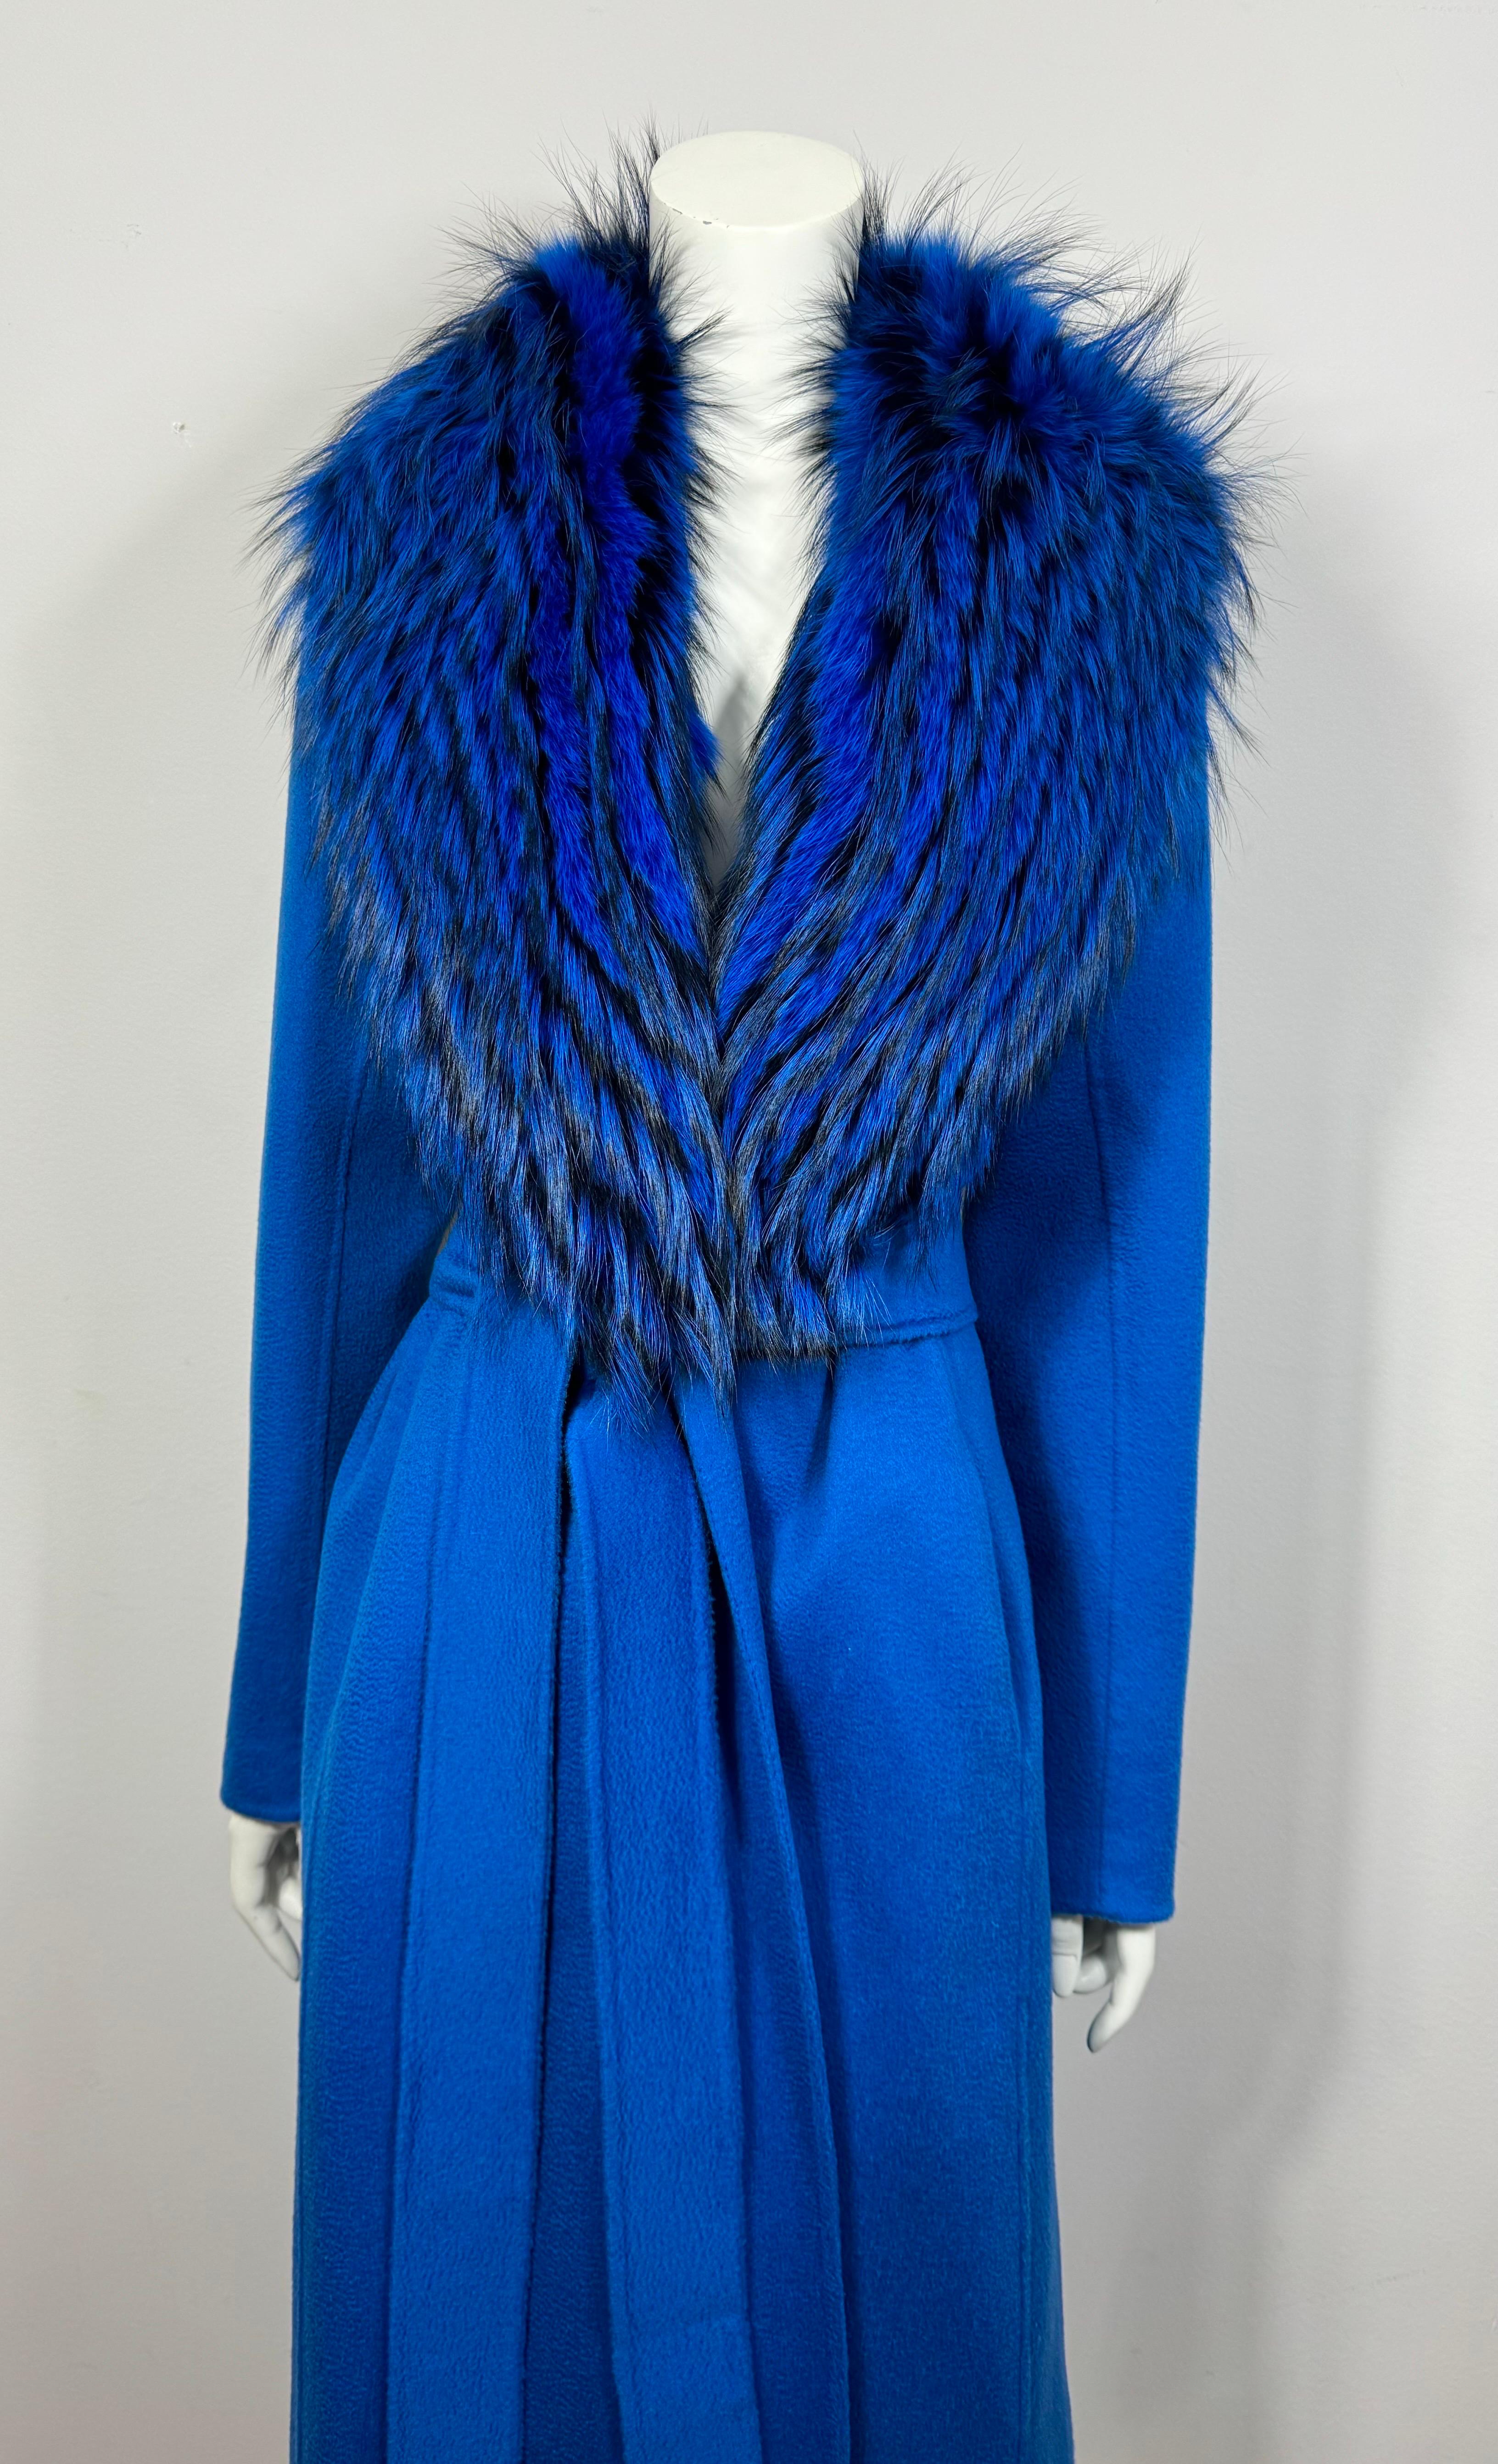 Women's or Men's J Mendel Runway Fall 2016 Azure Cashmere Coat with Fox Fur Collar-Size Small-NWT For Sale